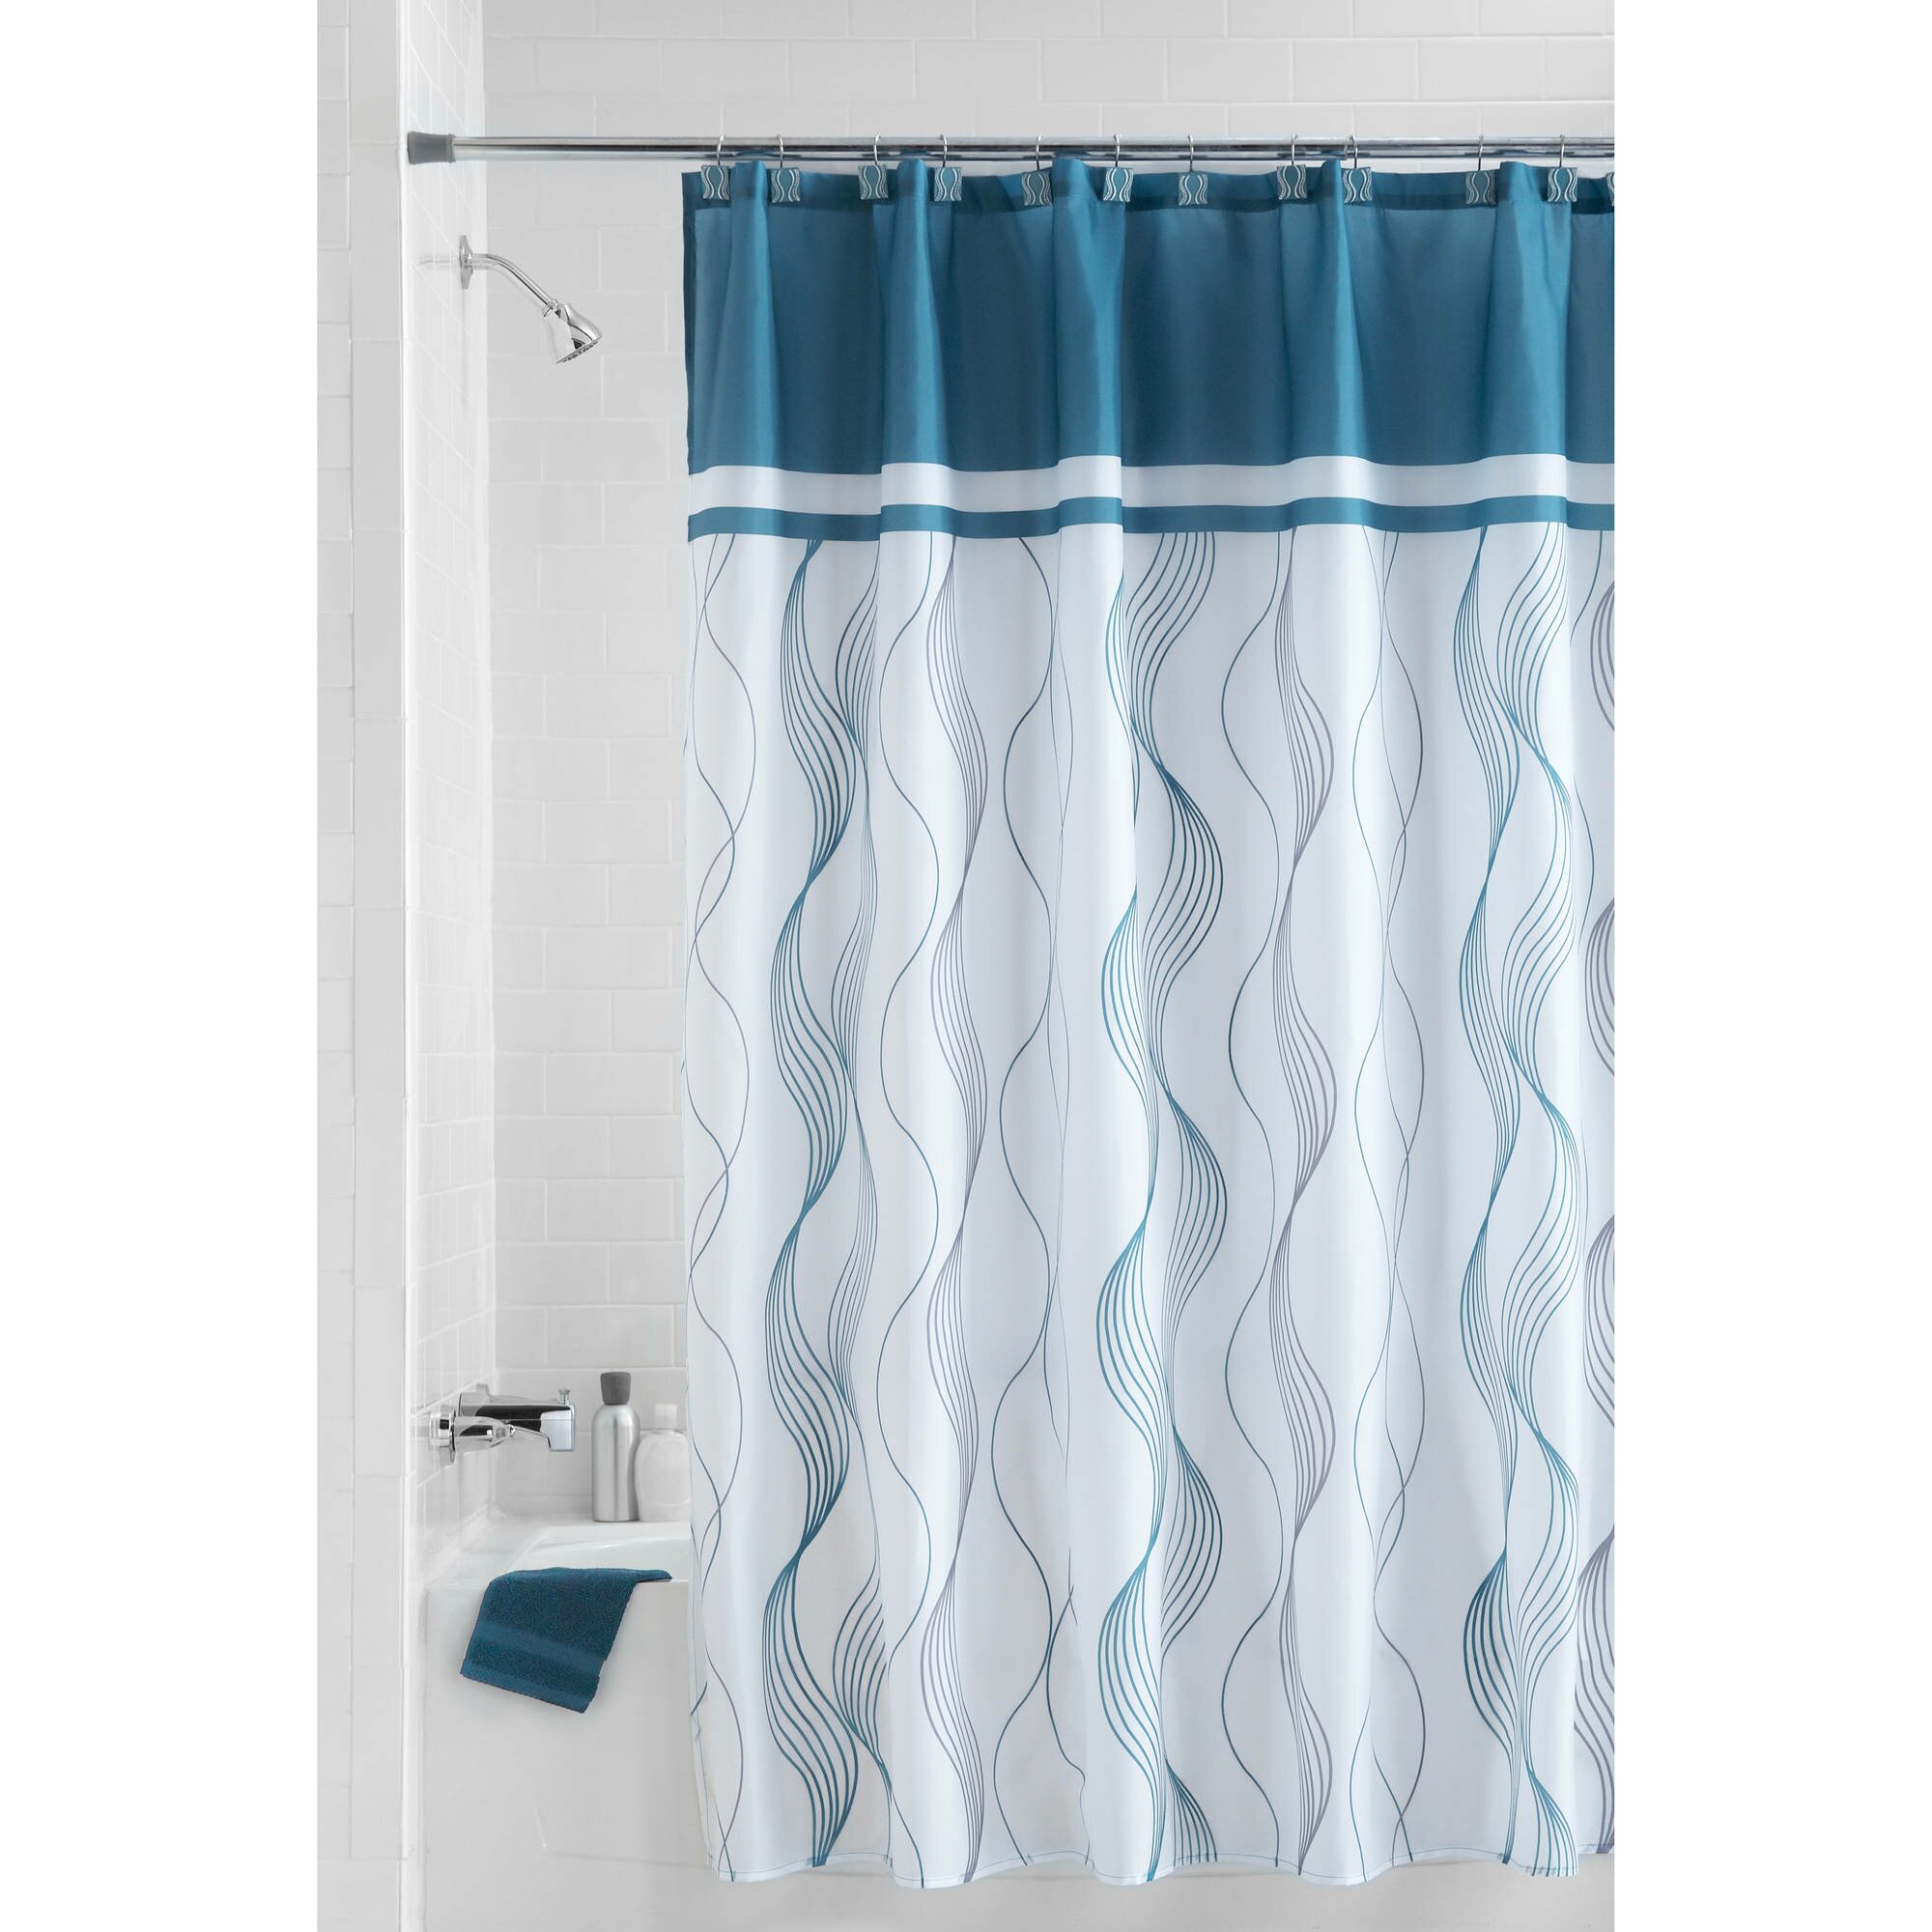 Ikea Shower Curtain for Best Your Bathroom Decoration: Ikea Shower Curtain | Single Stall Shower Curtain | Ikea Tension Rod